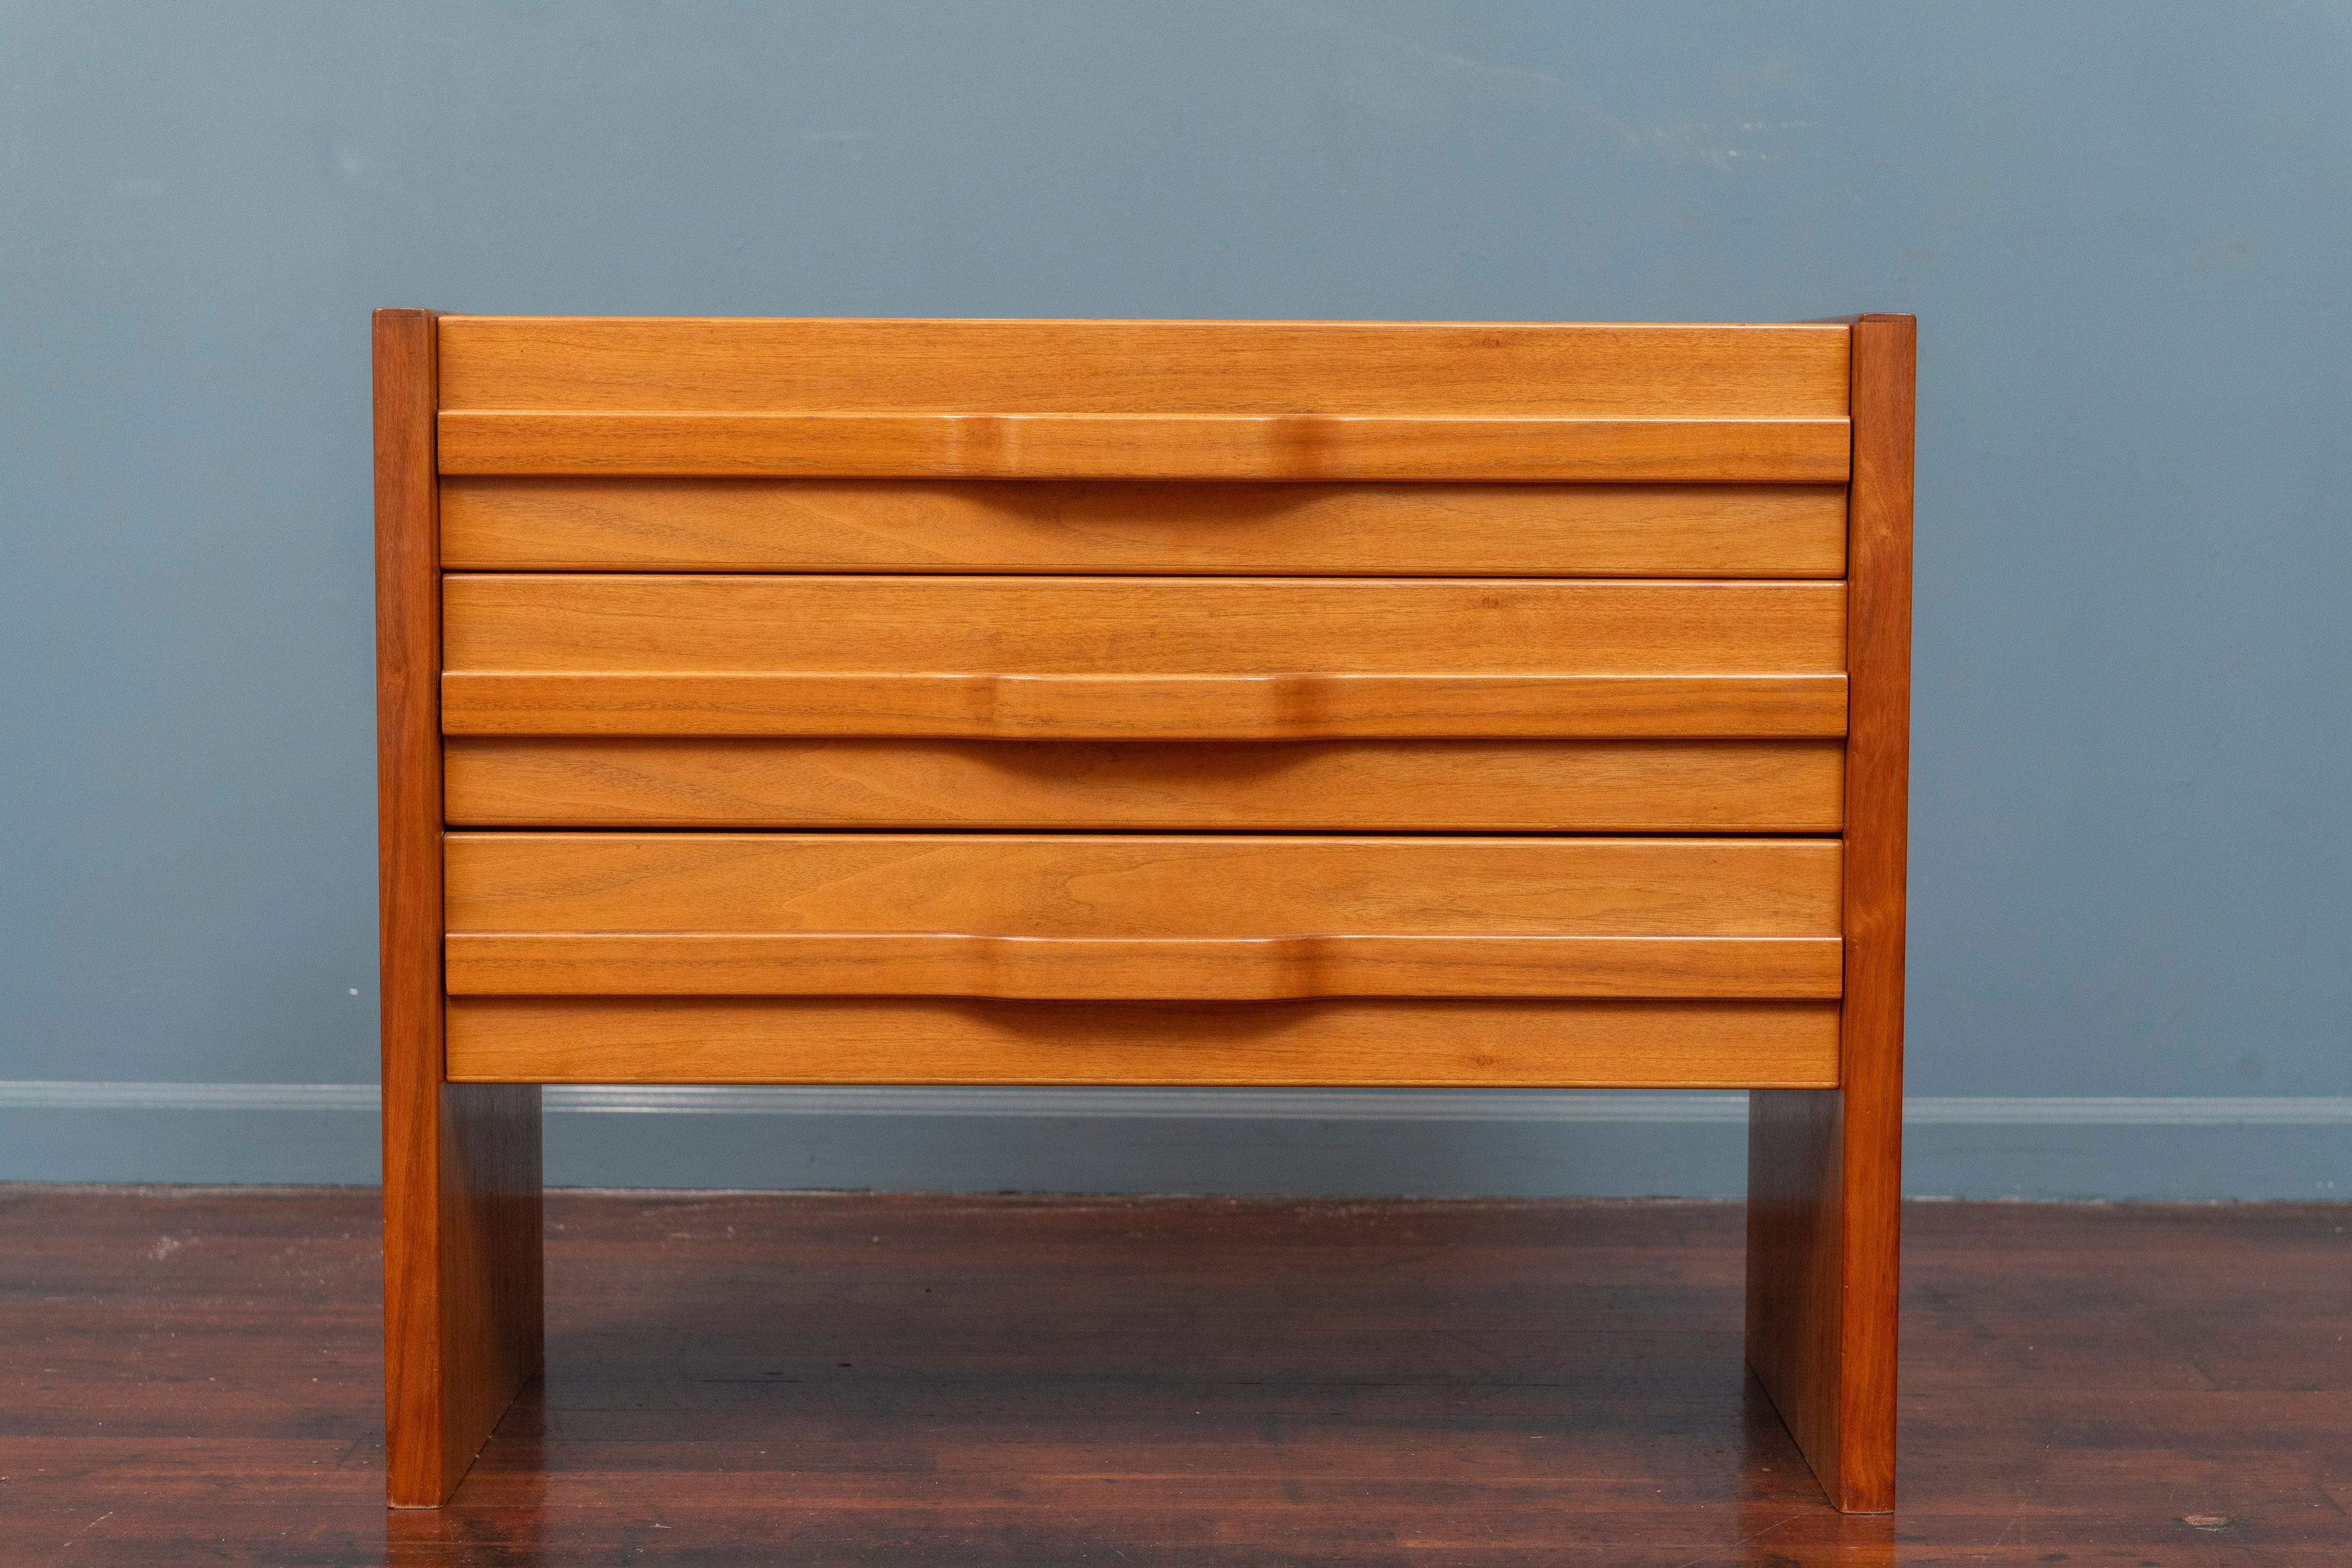 Maison Regain chest of drawers or dresser made from solid elm, France. High quality construction and use of materials with three drawers and molded elm pulls. Simple clean aesthetic feel with functionality, perfect for a guest room or entry way.